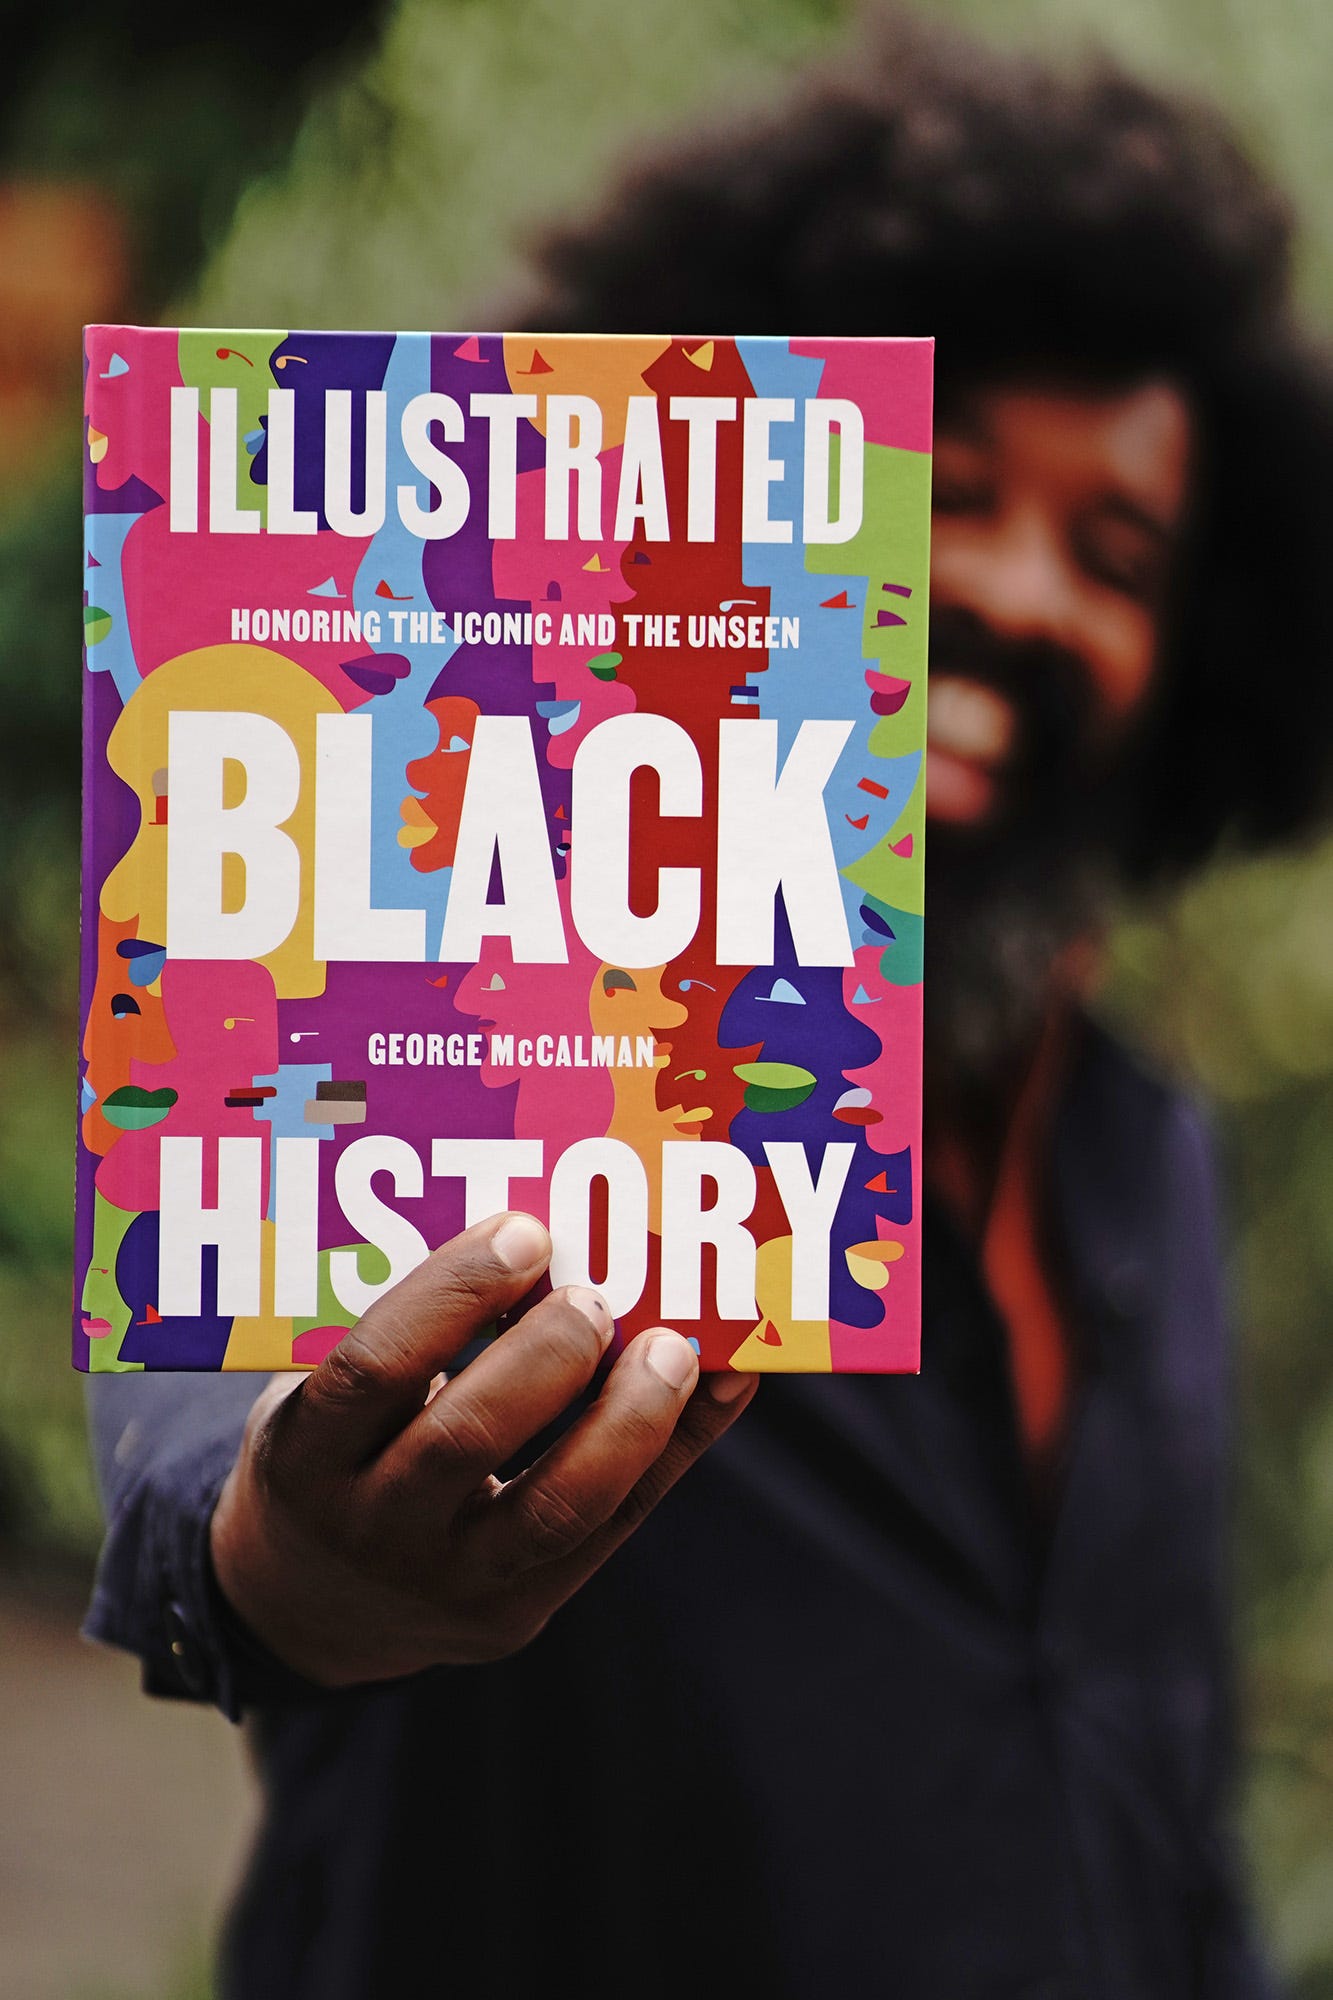 Artist George McCalman wants his new book to be an 'accessible Bible' of Black  history | EW.com